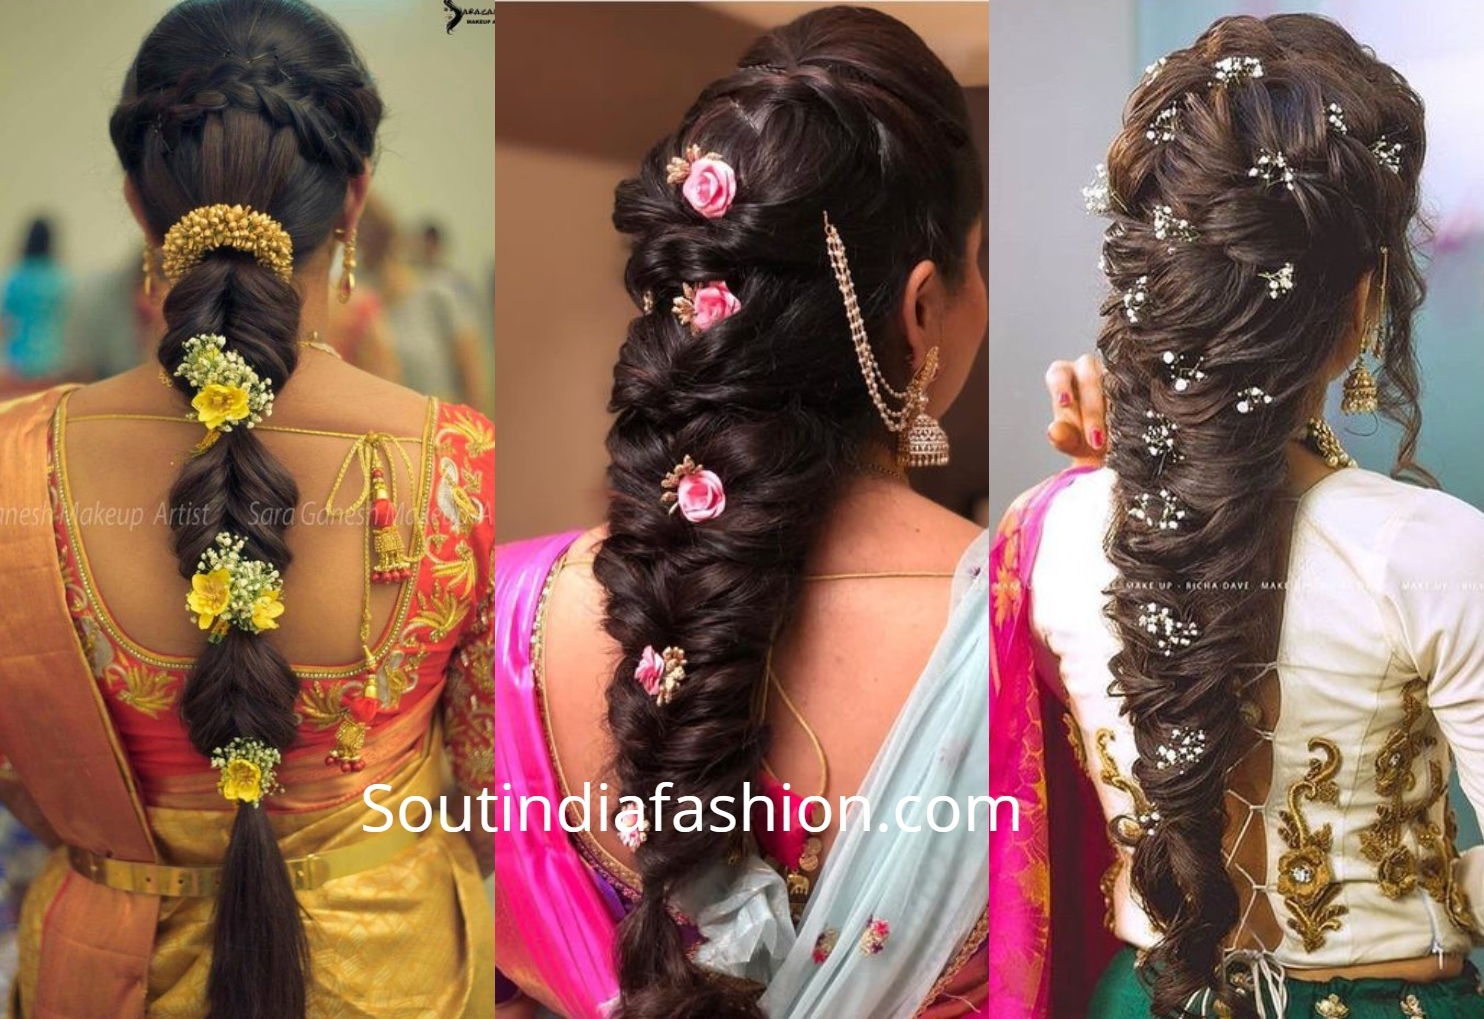 Top 10 South Indian Bridal Hairstyles For Weddings, Engagement Etc. with South Asian Wedding Hairstyles